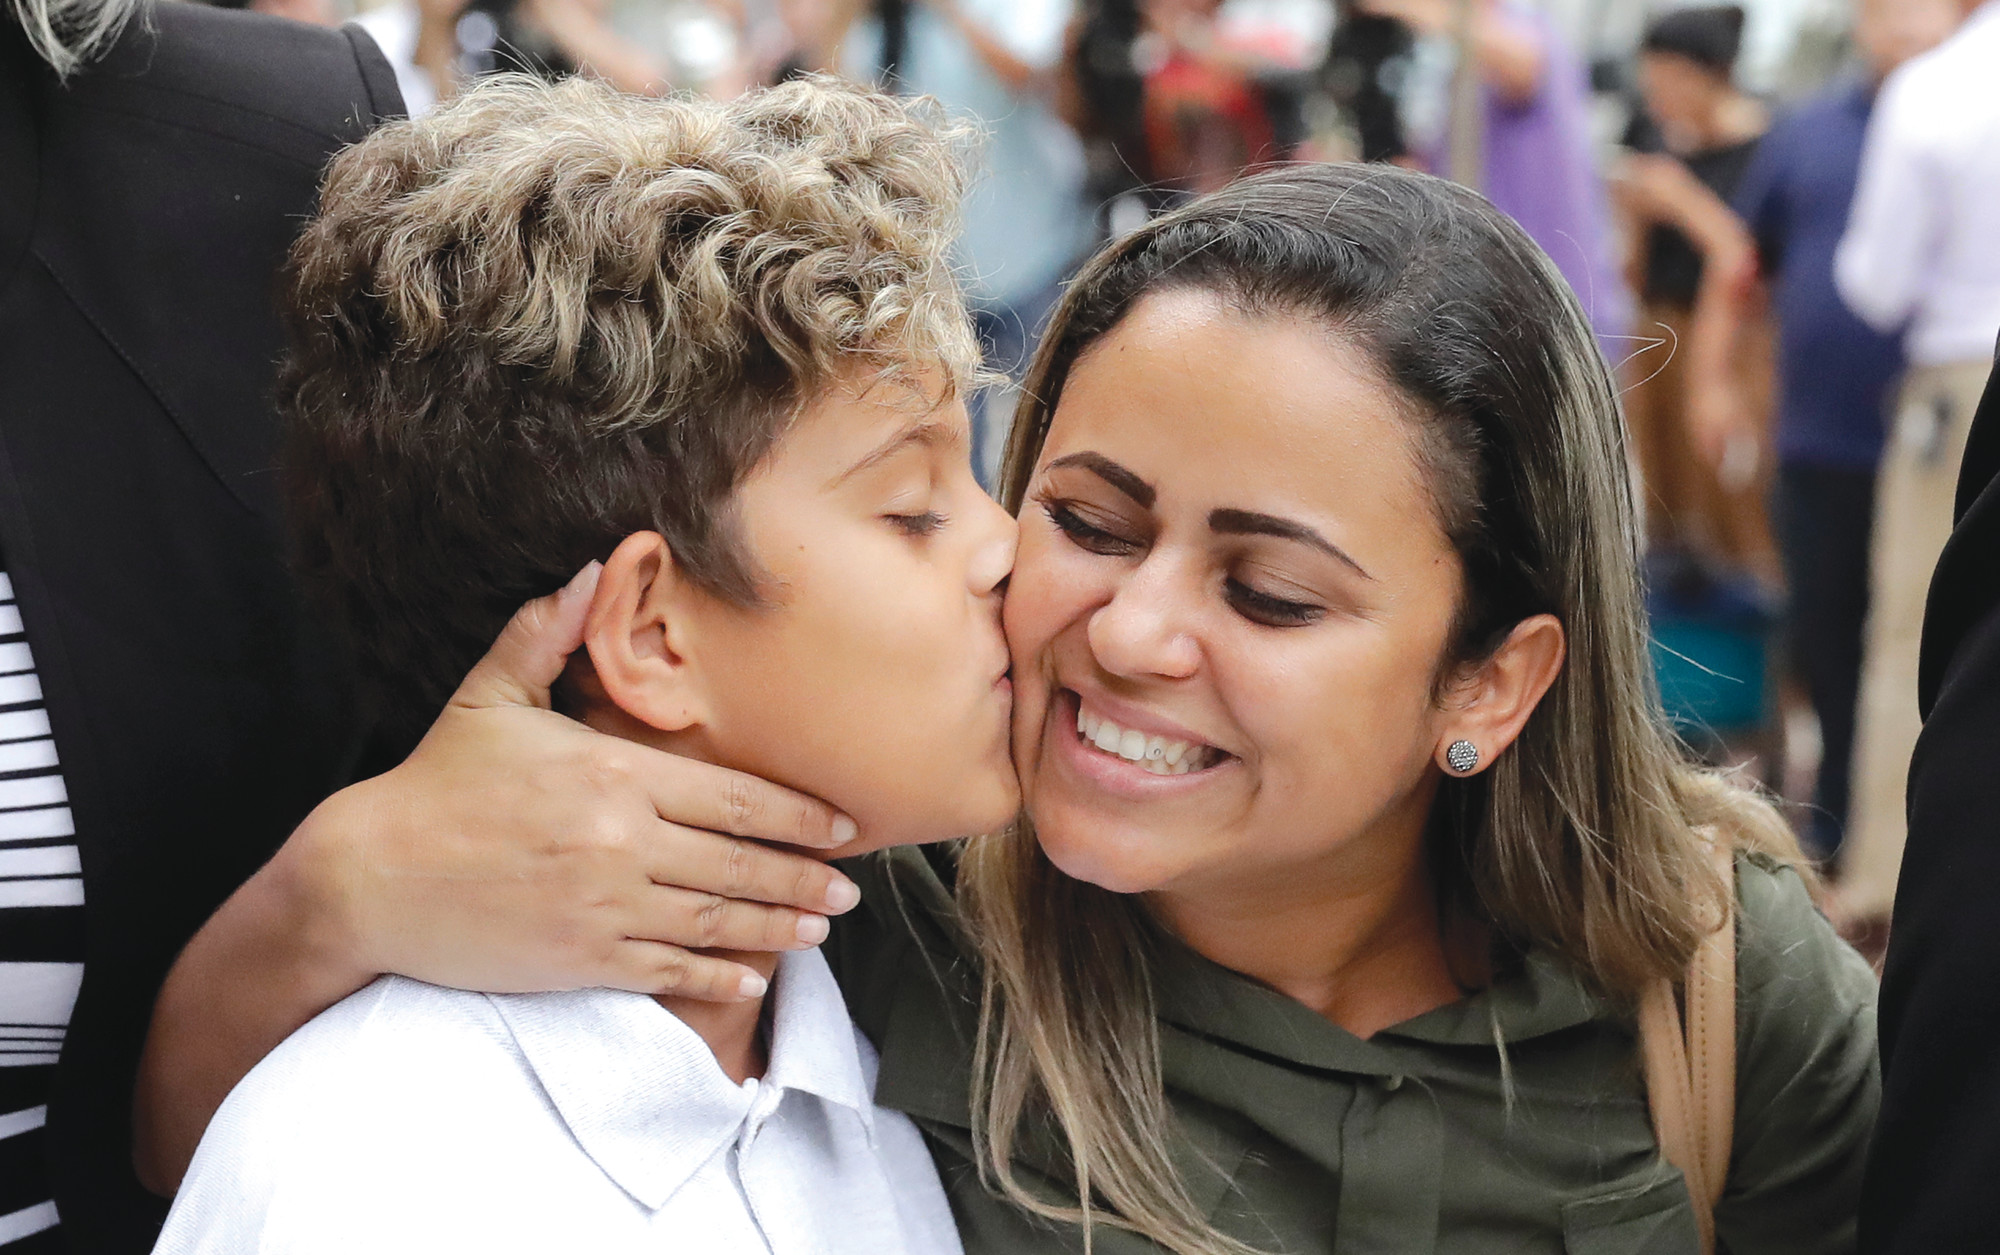 Diego Magalhaes, left, 10, kisses his mother Sirley Silveira Paixao, an immigrant from Brazil seeking asylum with her son, after Diego was released from immigration detention on Thursday in Chicago.